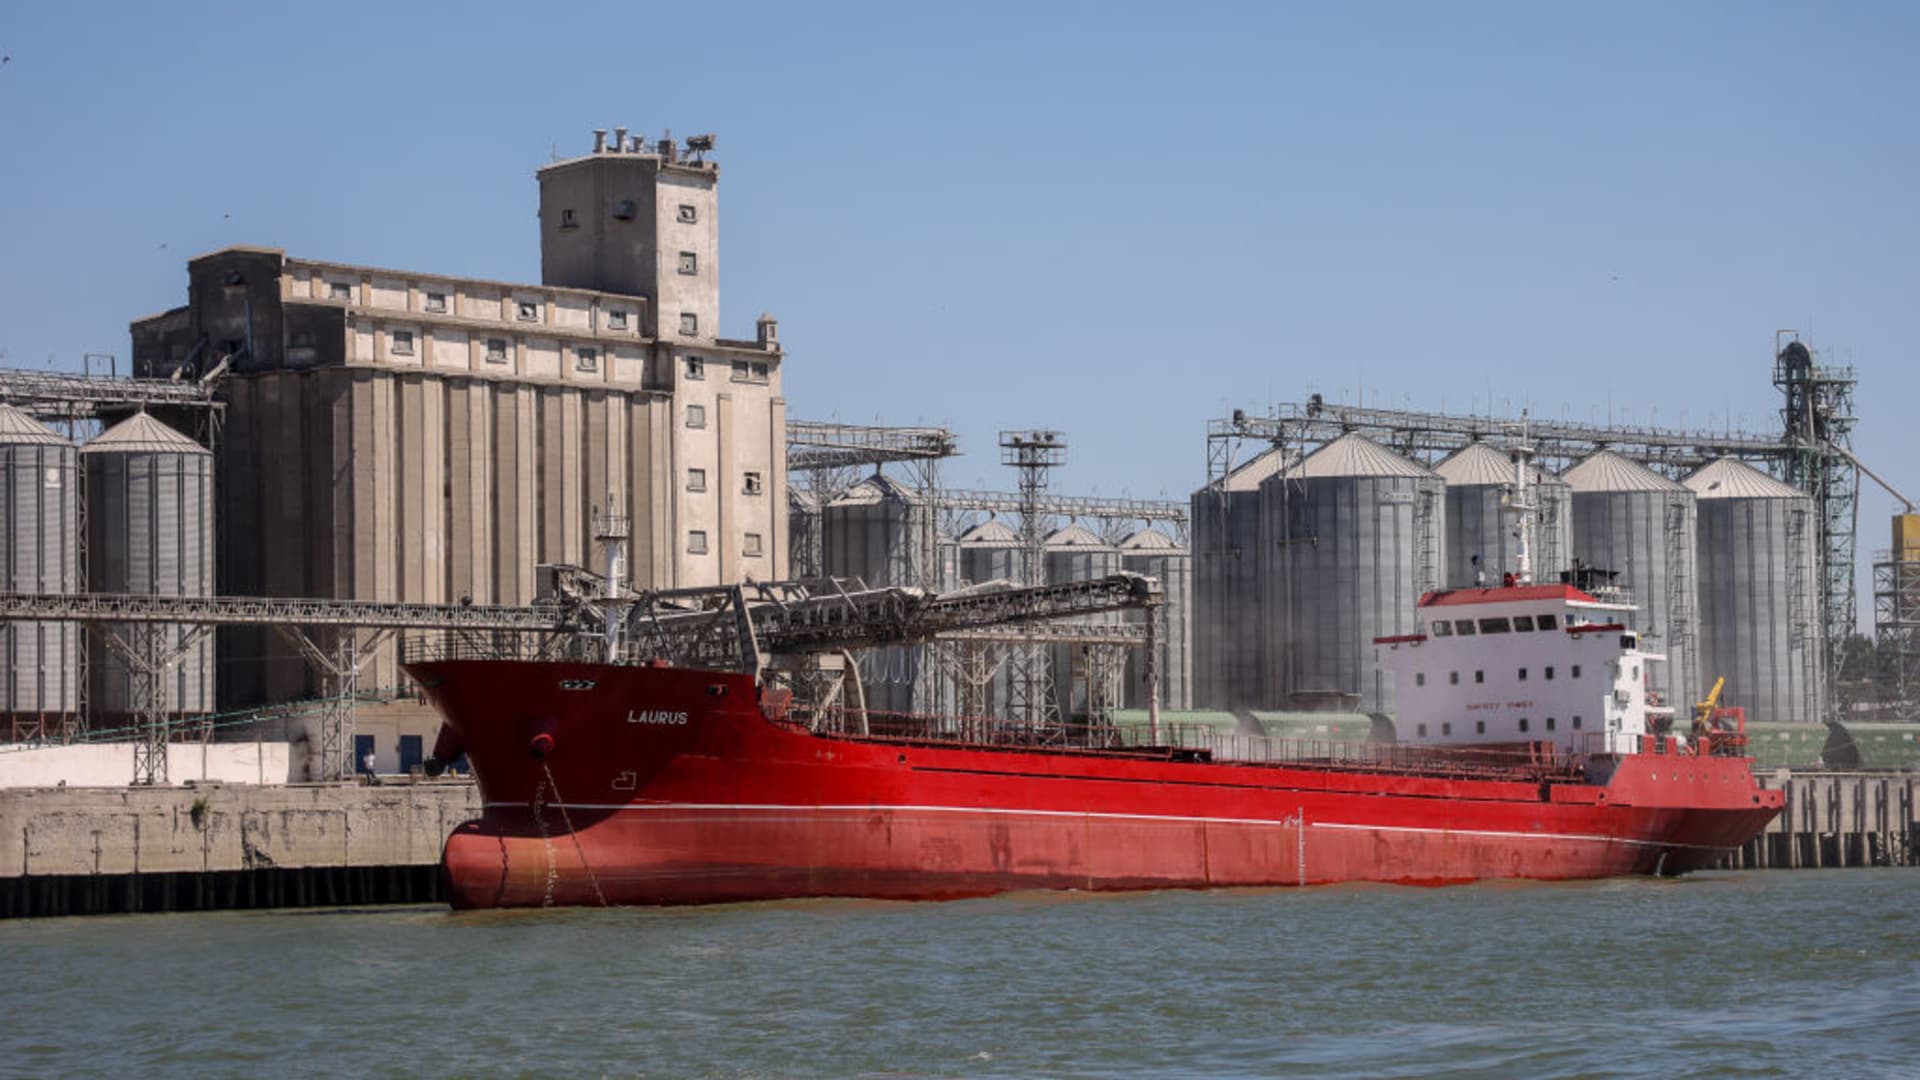 The vessel waits to be loaded at Reni river port on Danube river, in Odesa region, Ukraine, July 21, 2022.